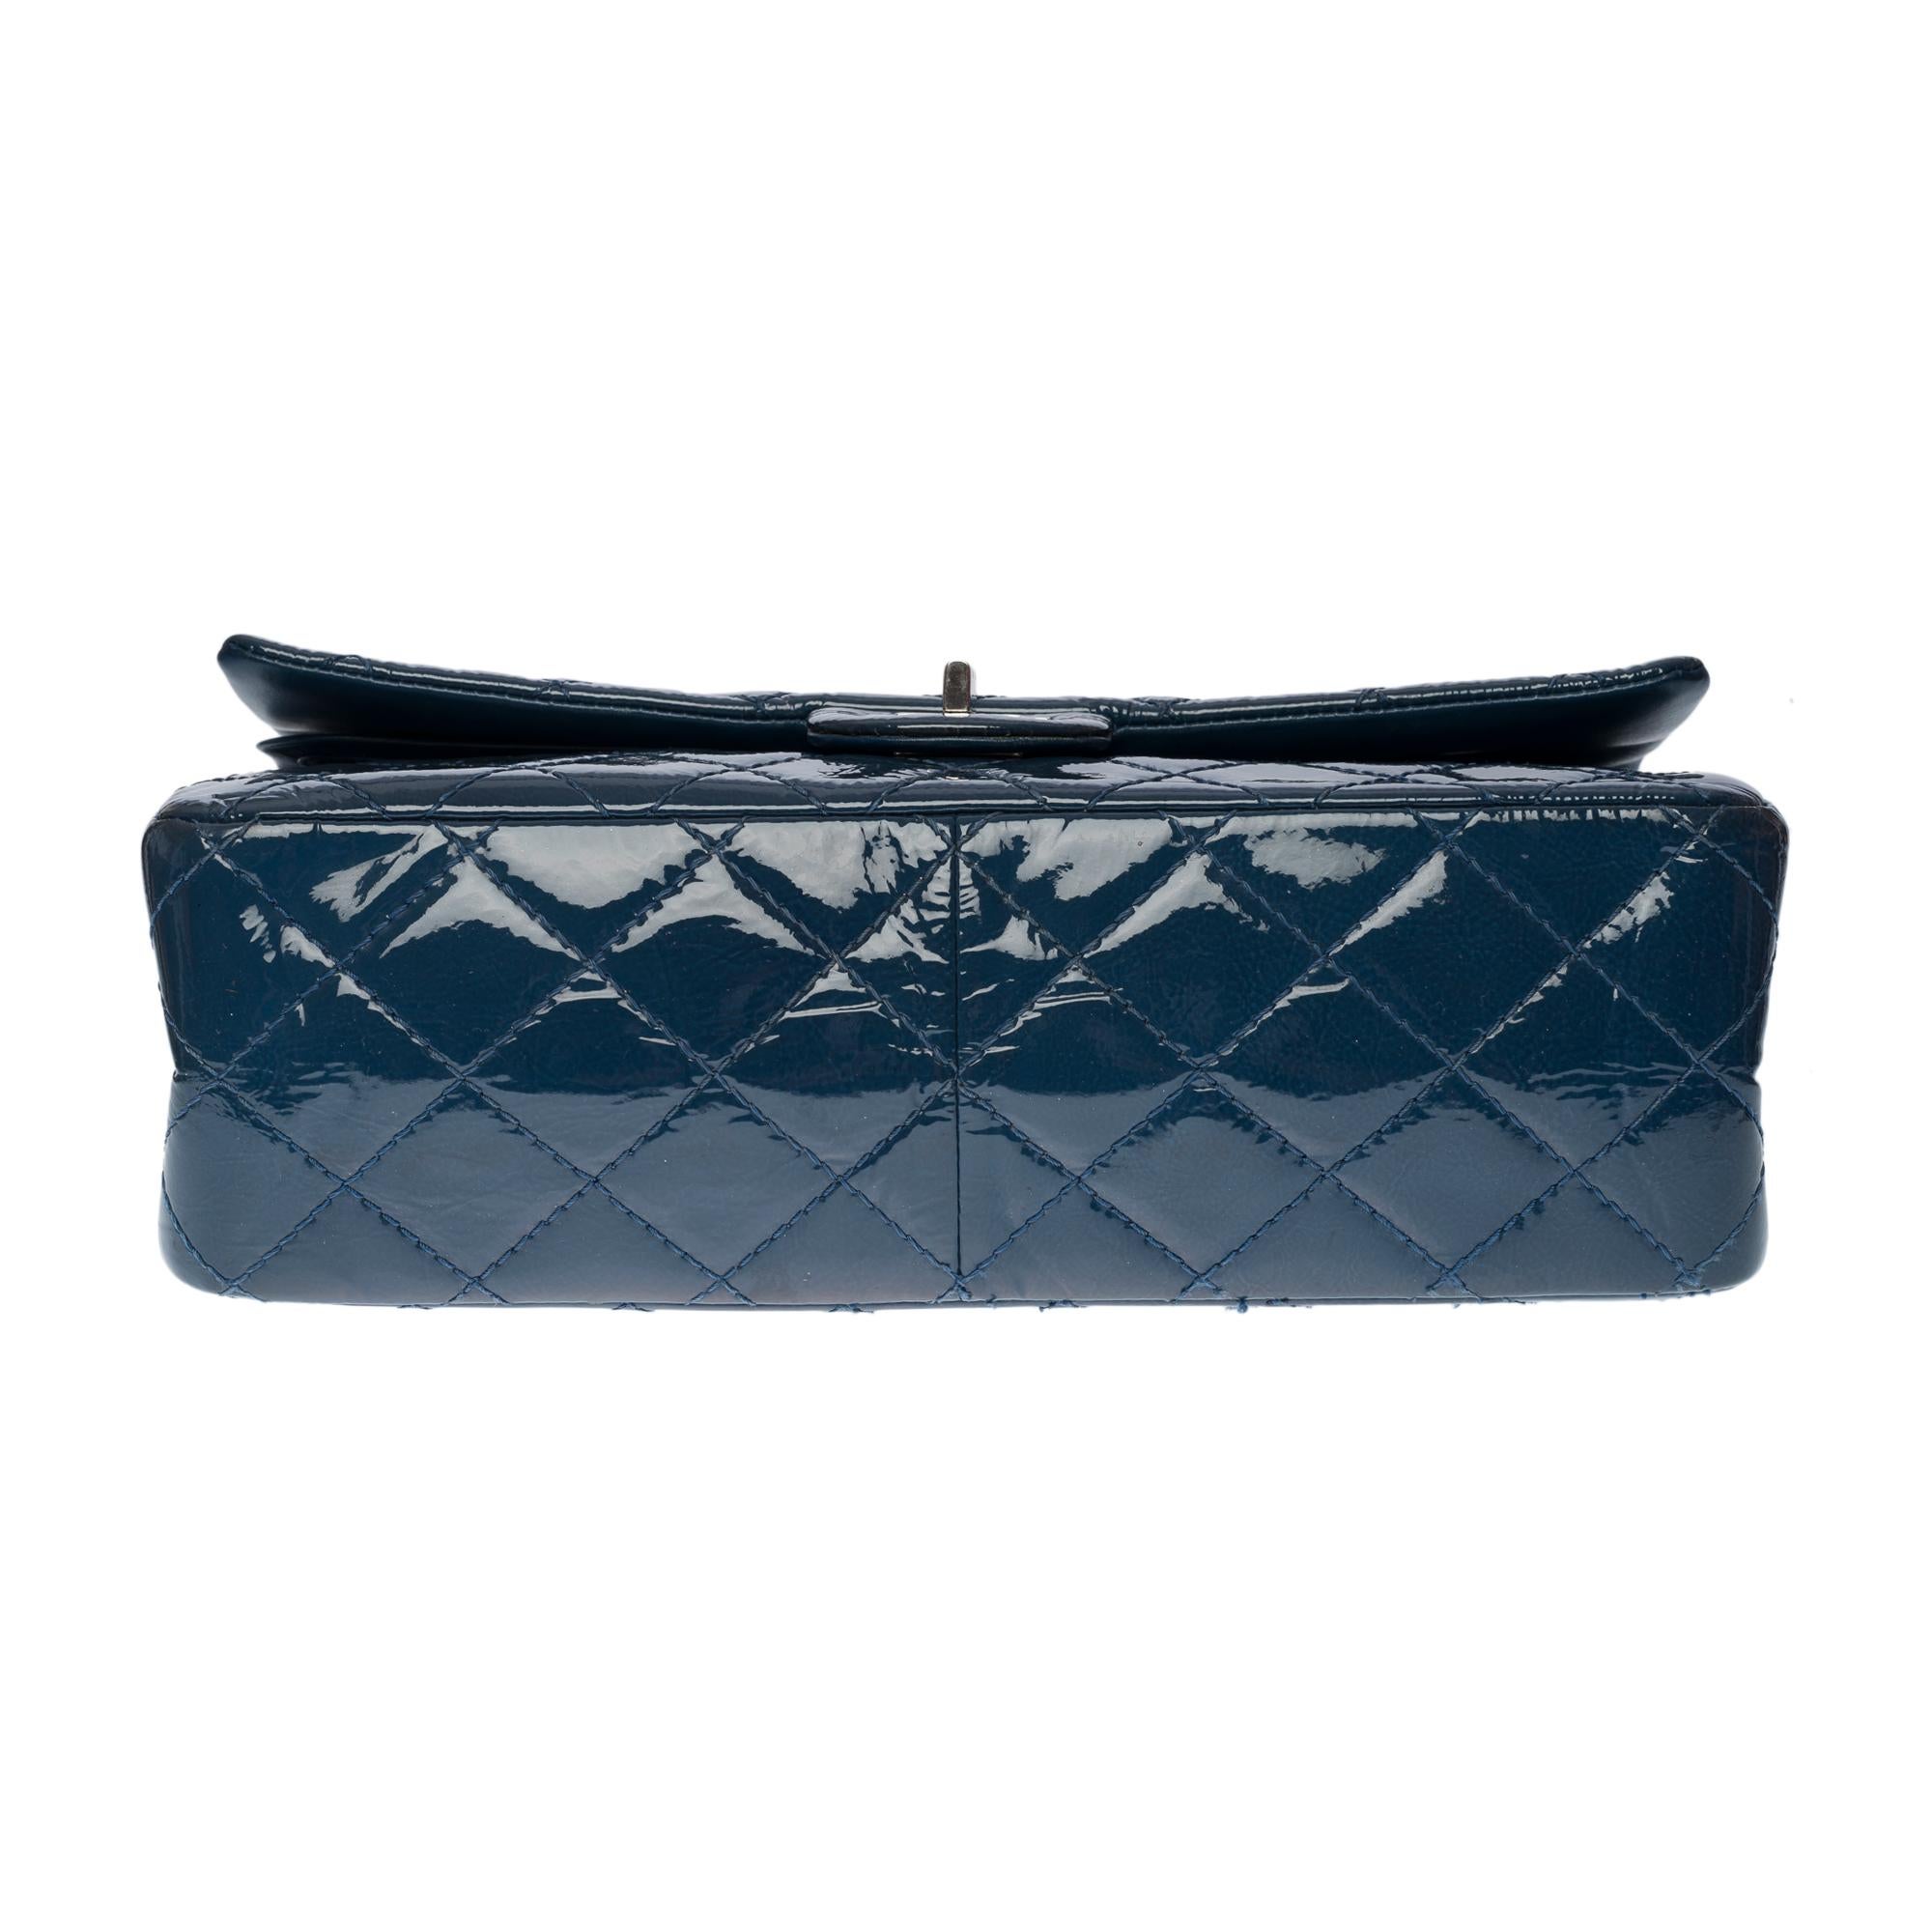 Chanel Classic 2.55 double flap shoulder bag in blue quilted patent leather, SHW 1